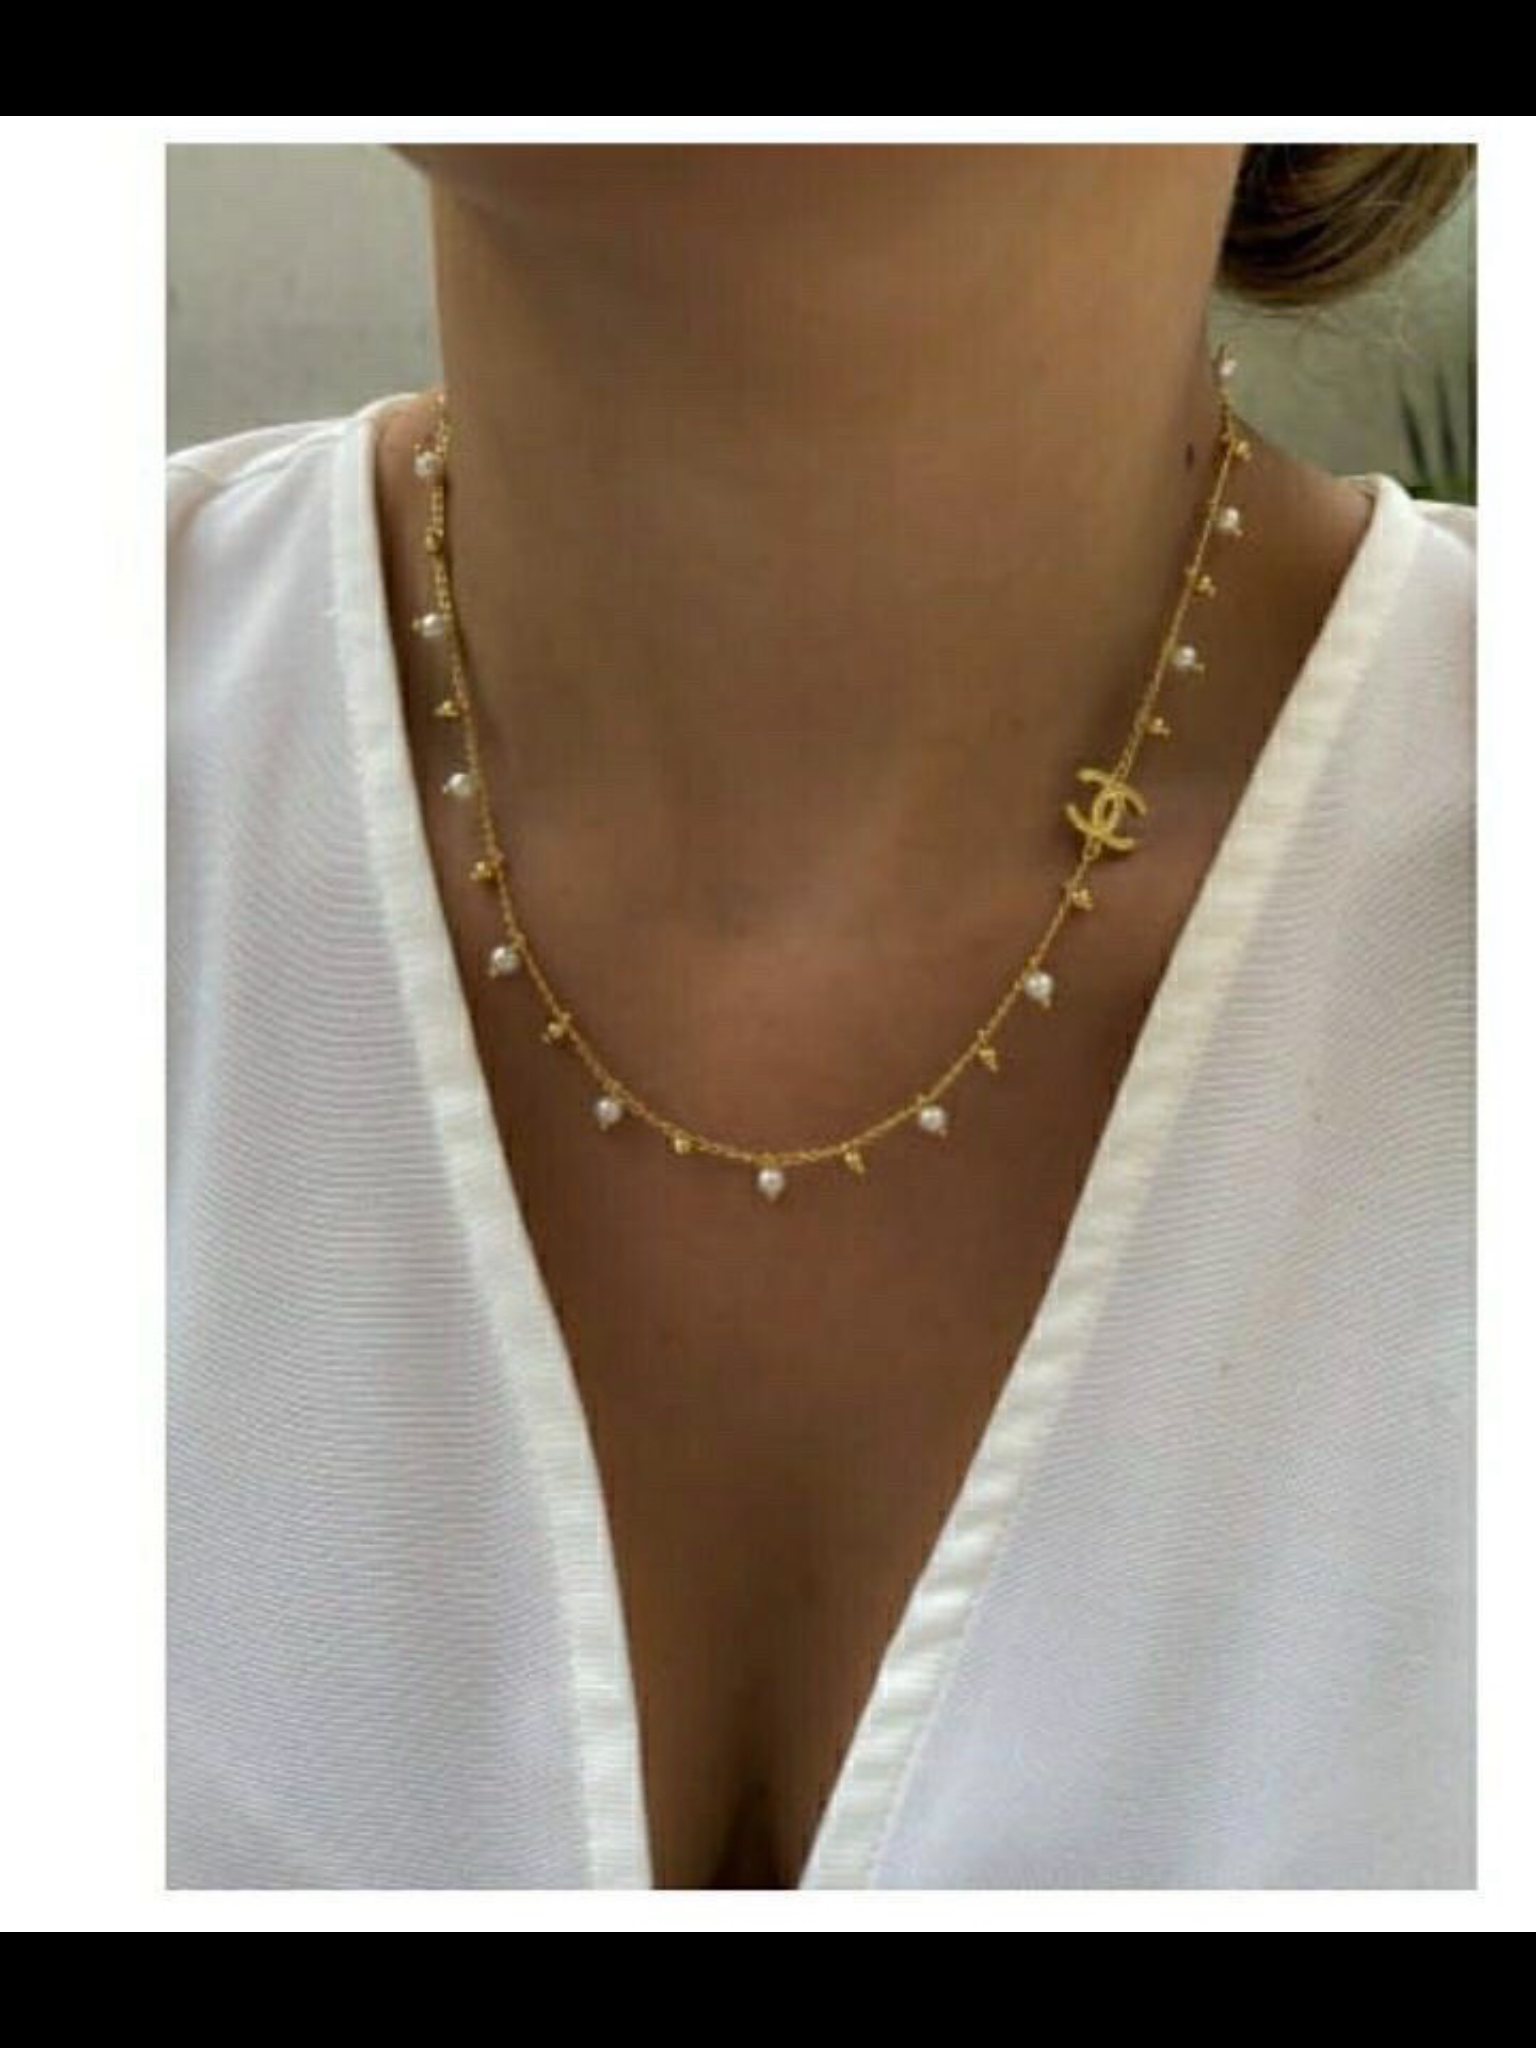 Famous Brand Inspired Necklace 18k Gold Filled